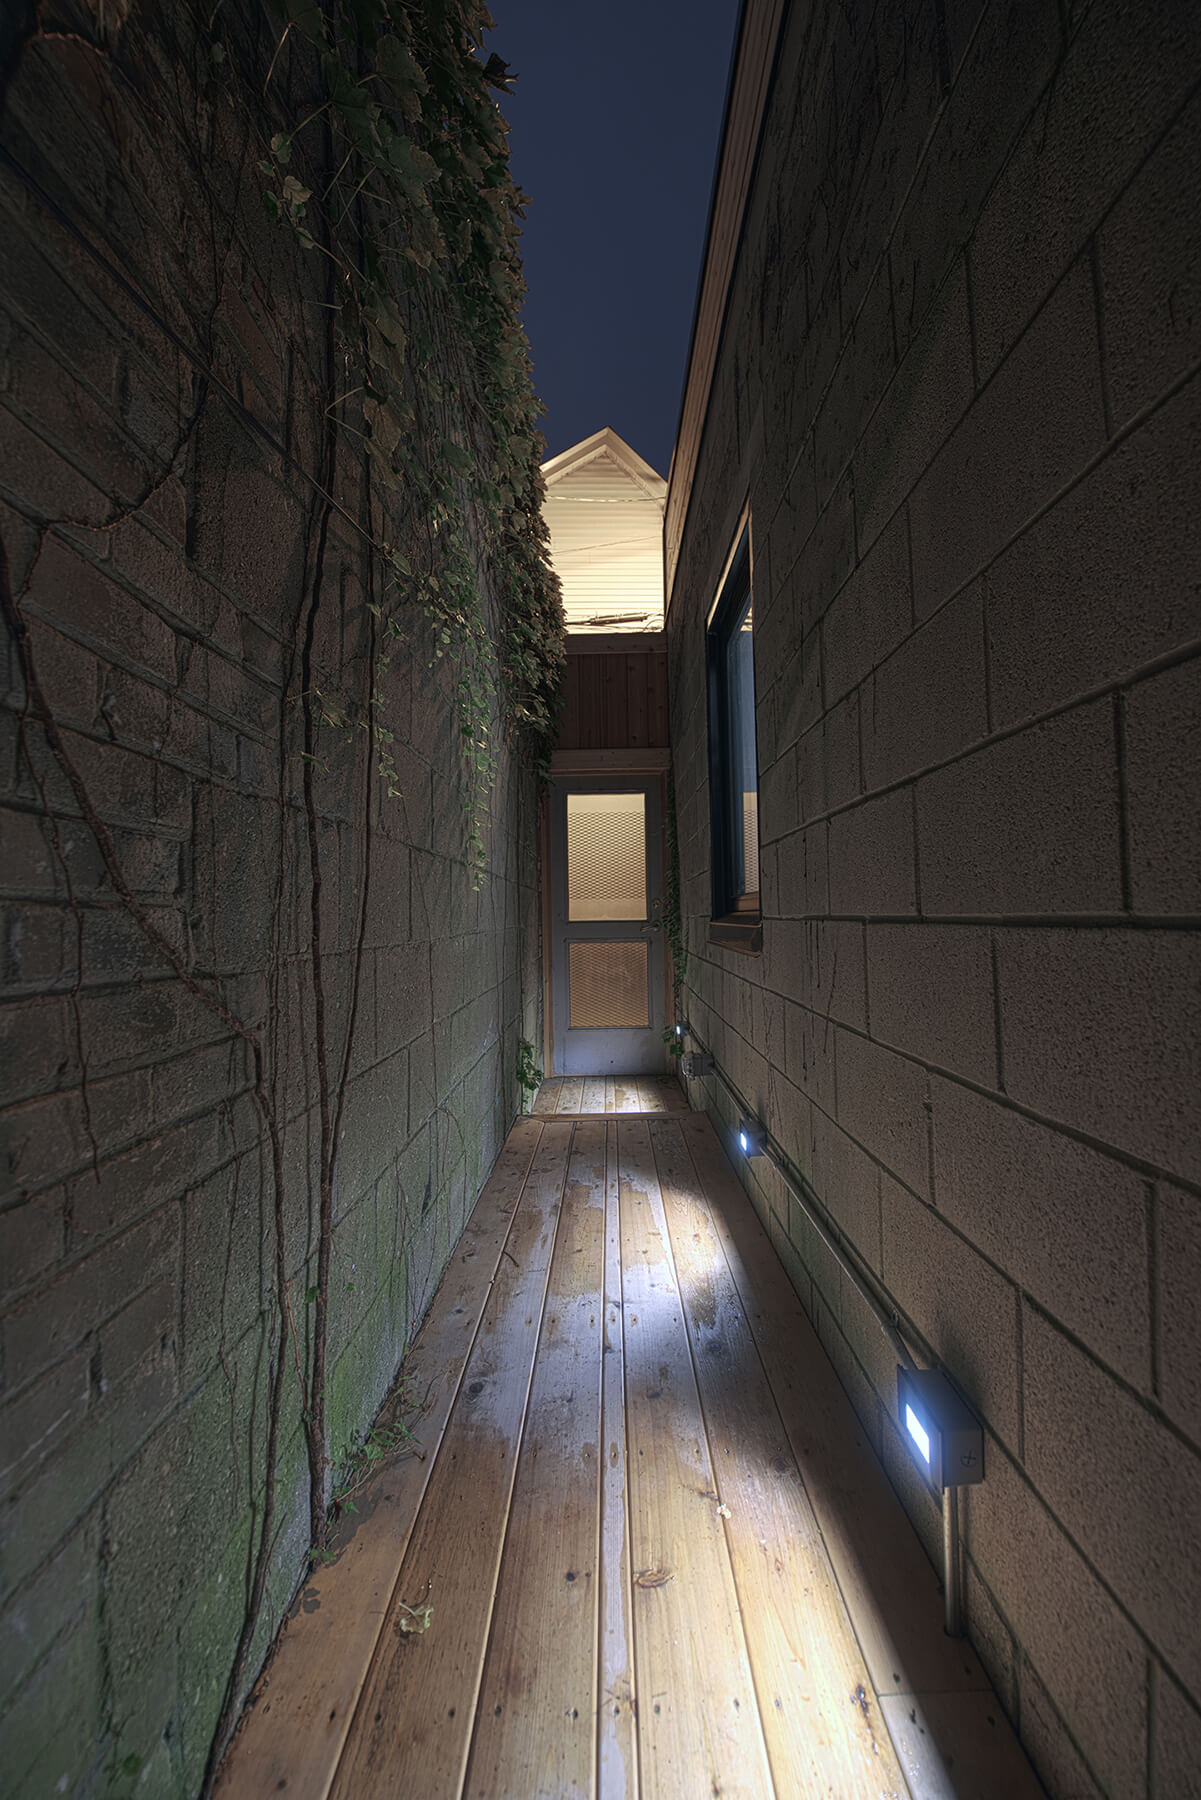 Exterior Corridor at Night - Sustainable Residential New Build Toronto